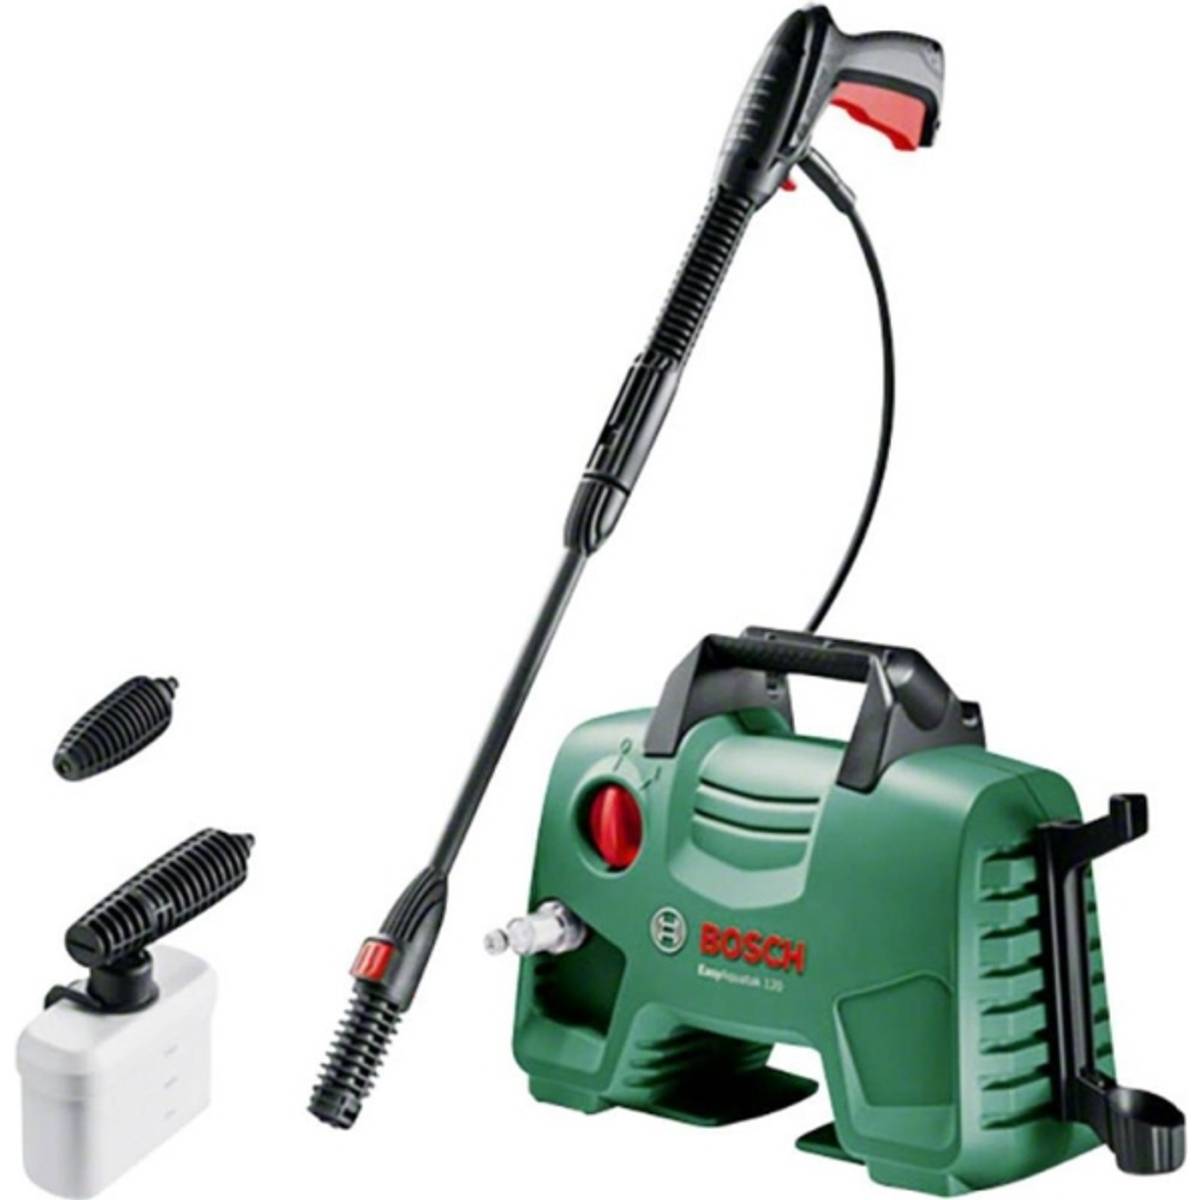 Bosch Pressure Washers 100 Products On Pricerunner See Prices